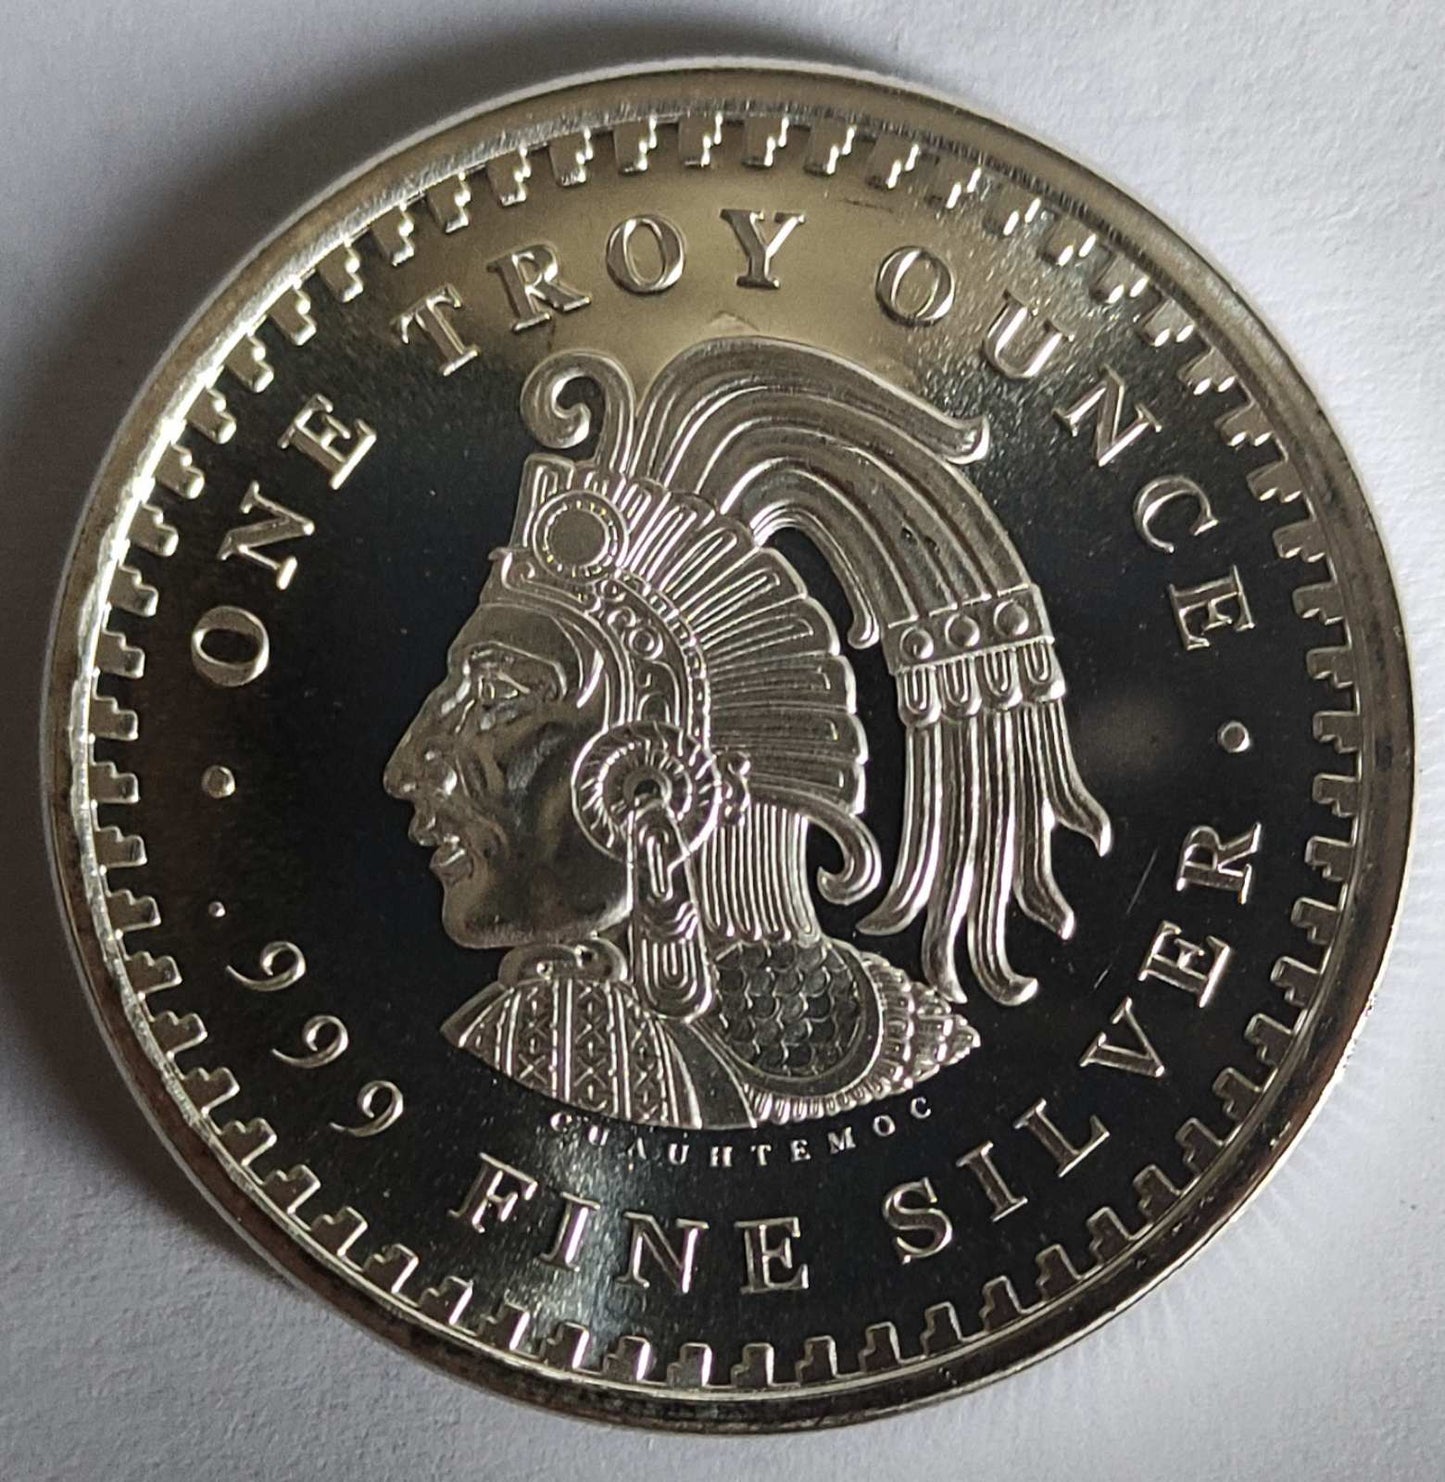 1 oz Silver Round in Capsule - Aztec Calendar (note: contains very minor contact marks)